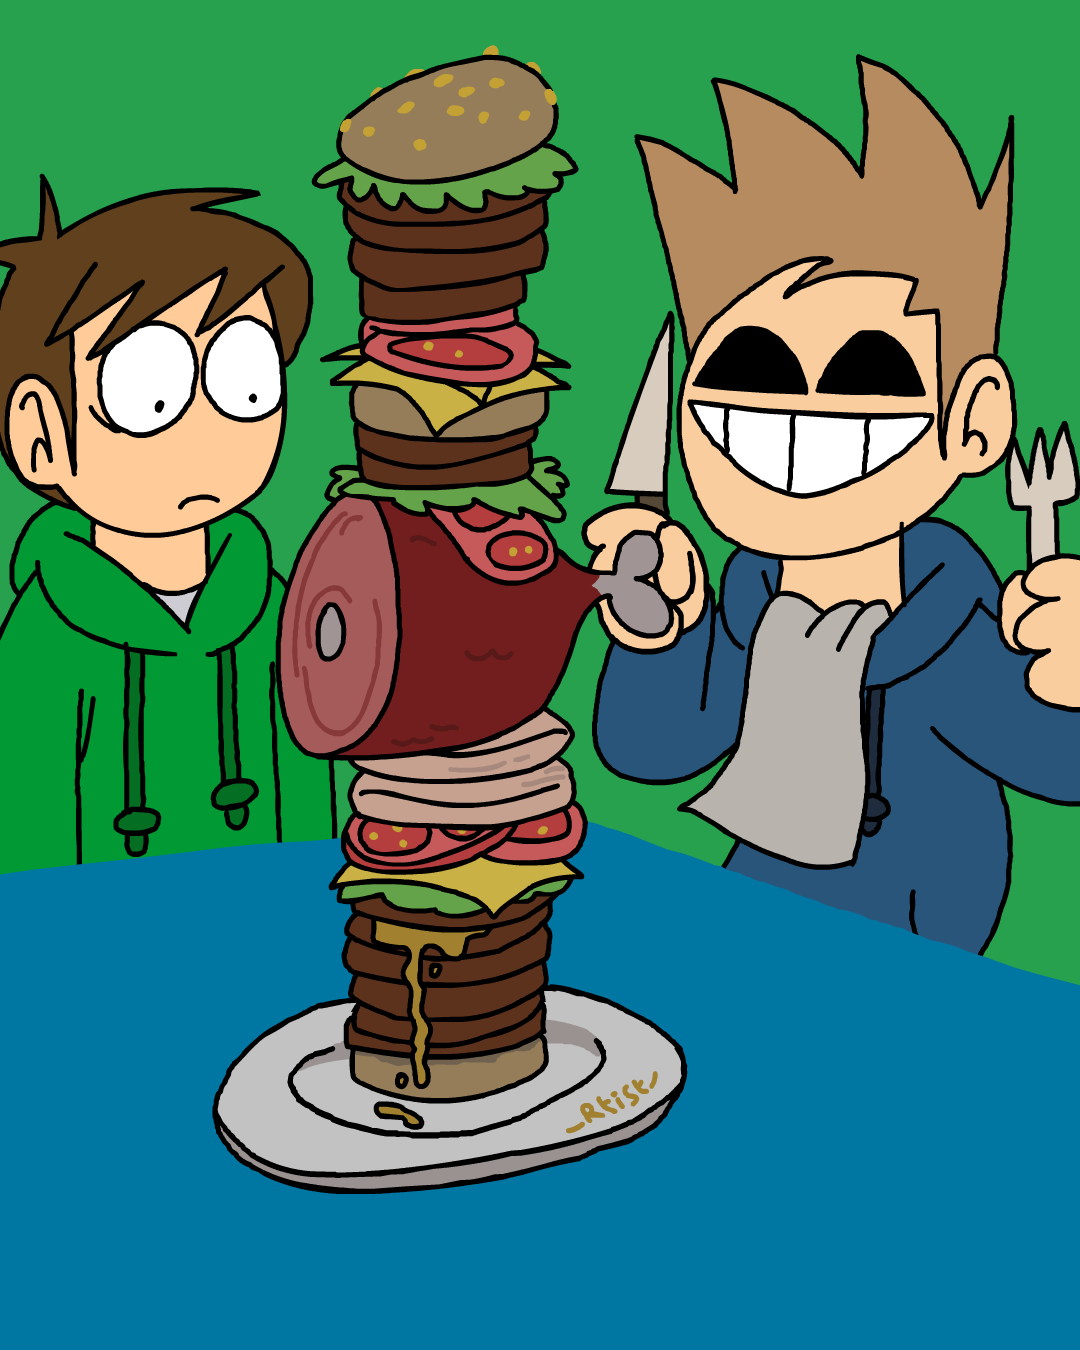 Eddsworld on Instagram: “It's Play In The Sand Day! Have you been to the  beach recently? What's your favourite thing to do…